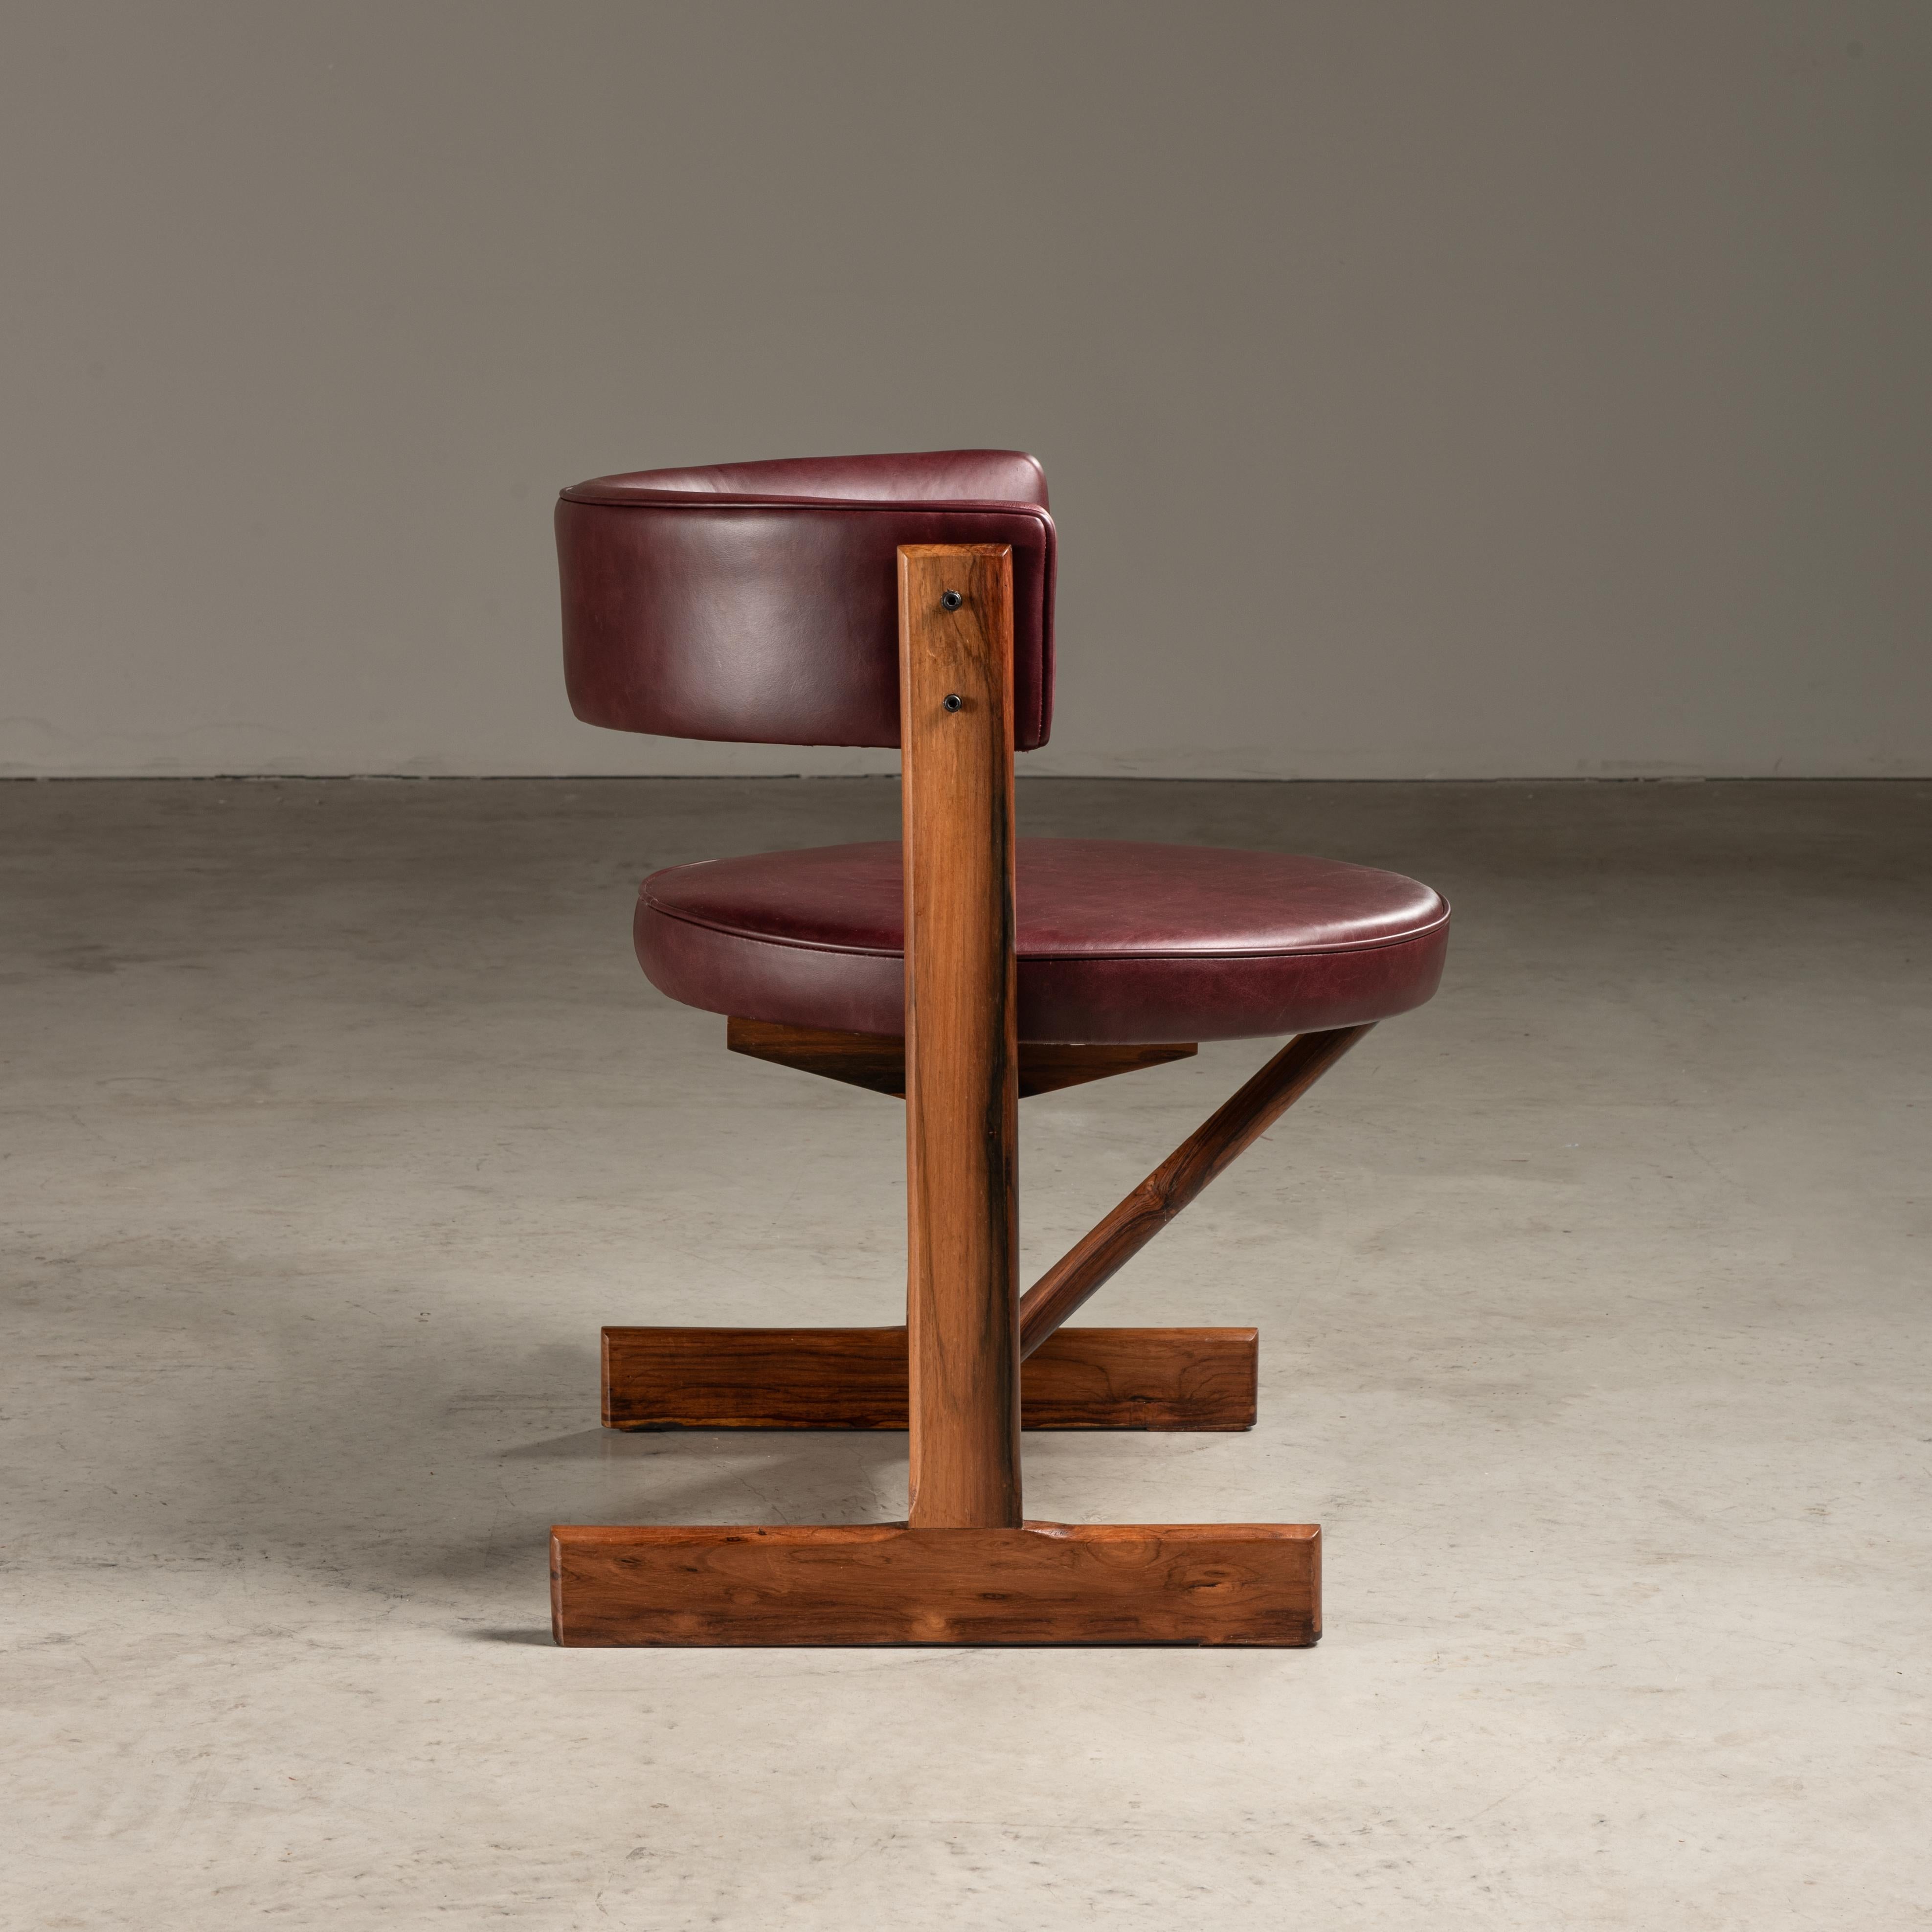 20th Century Round Modernist Wood and Leather Chair, Brazilian Mid-Century Design  For Sale